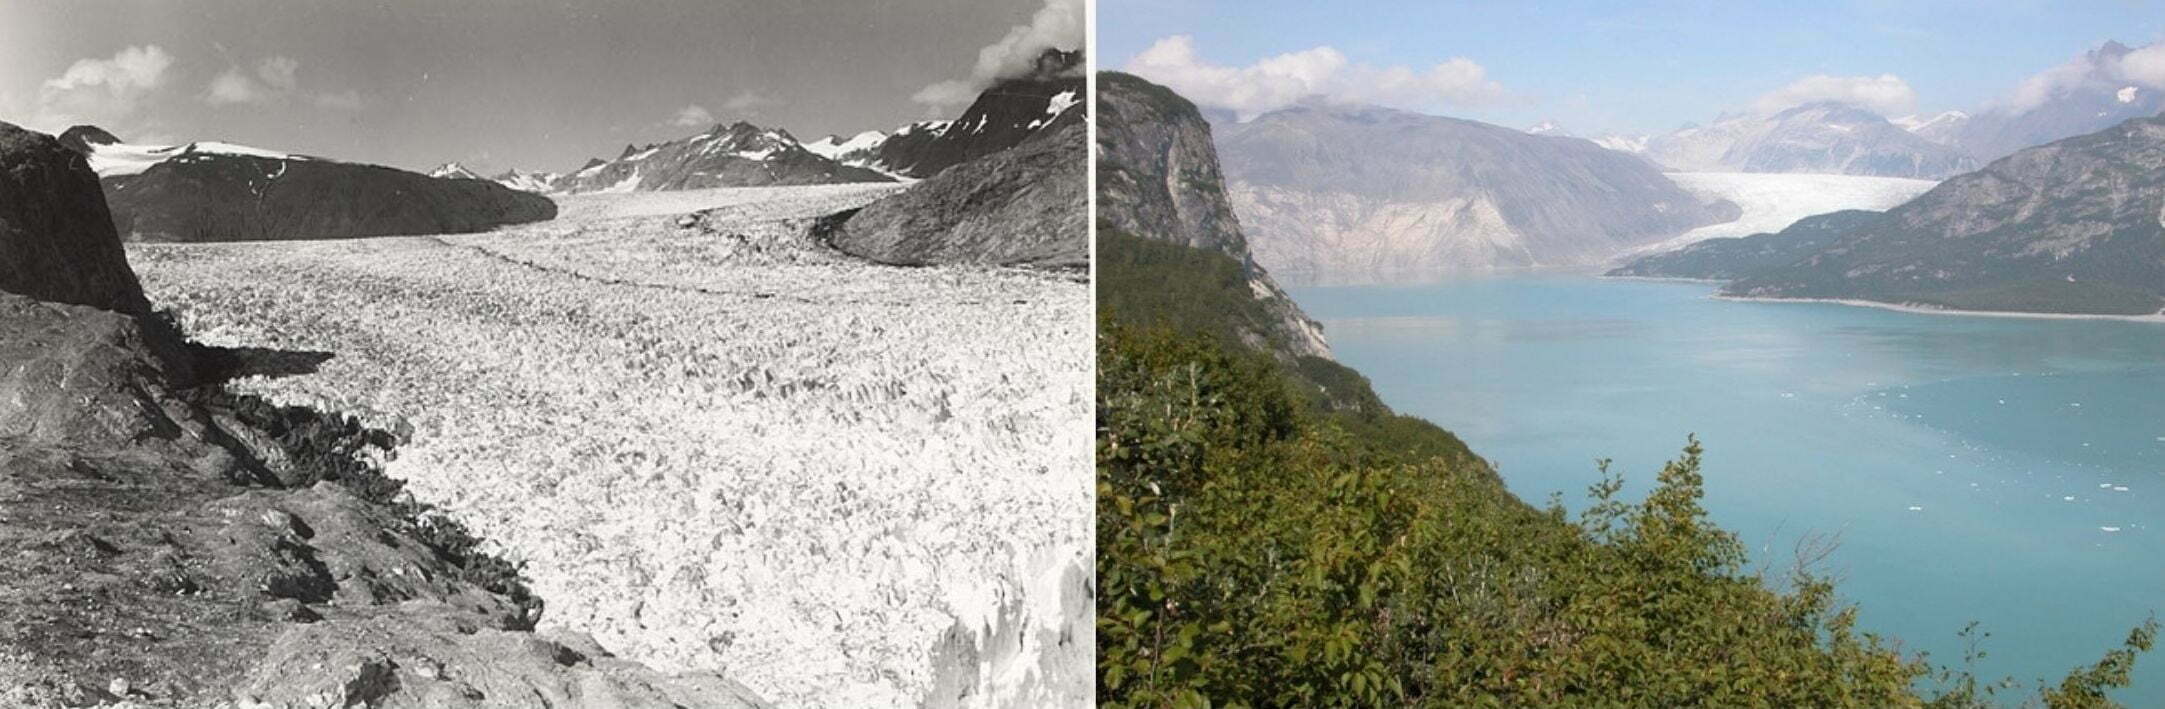 Muir Glacier, Alaska. Photographed by William Osgood in 1941 (left) and Bruce Molnia in 2004 (right). Images courtesy of NSIDC Glacier Photograph Collection.